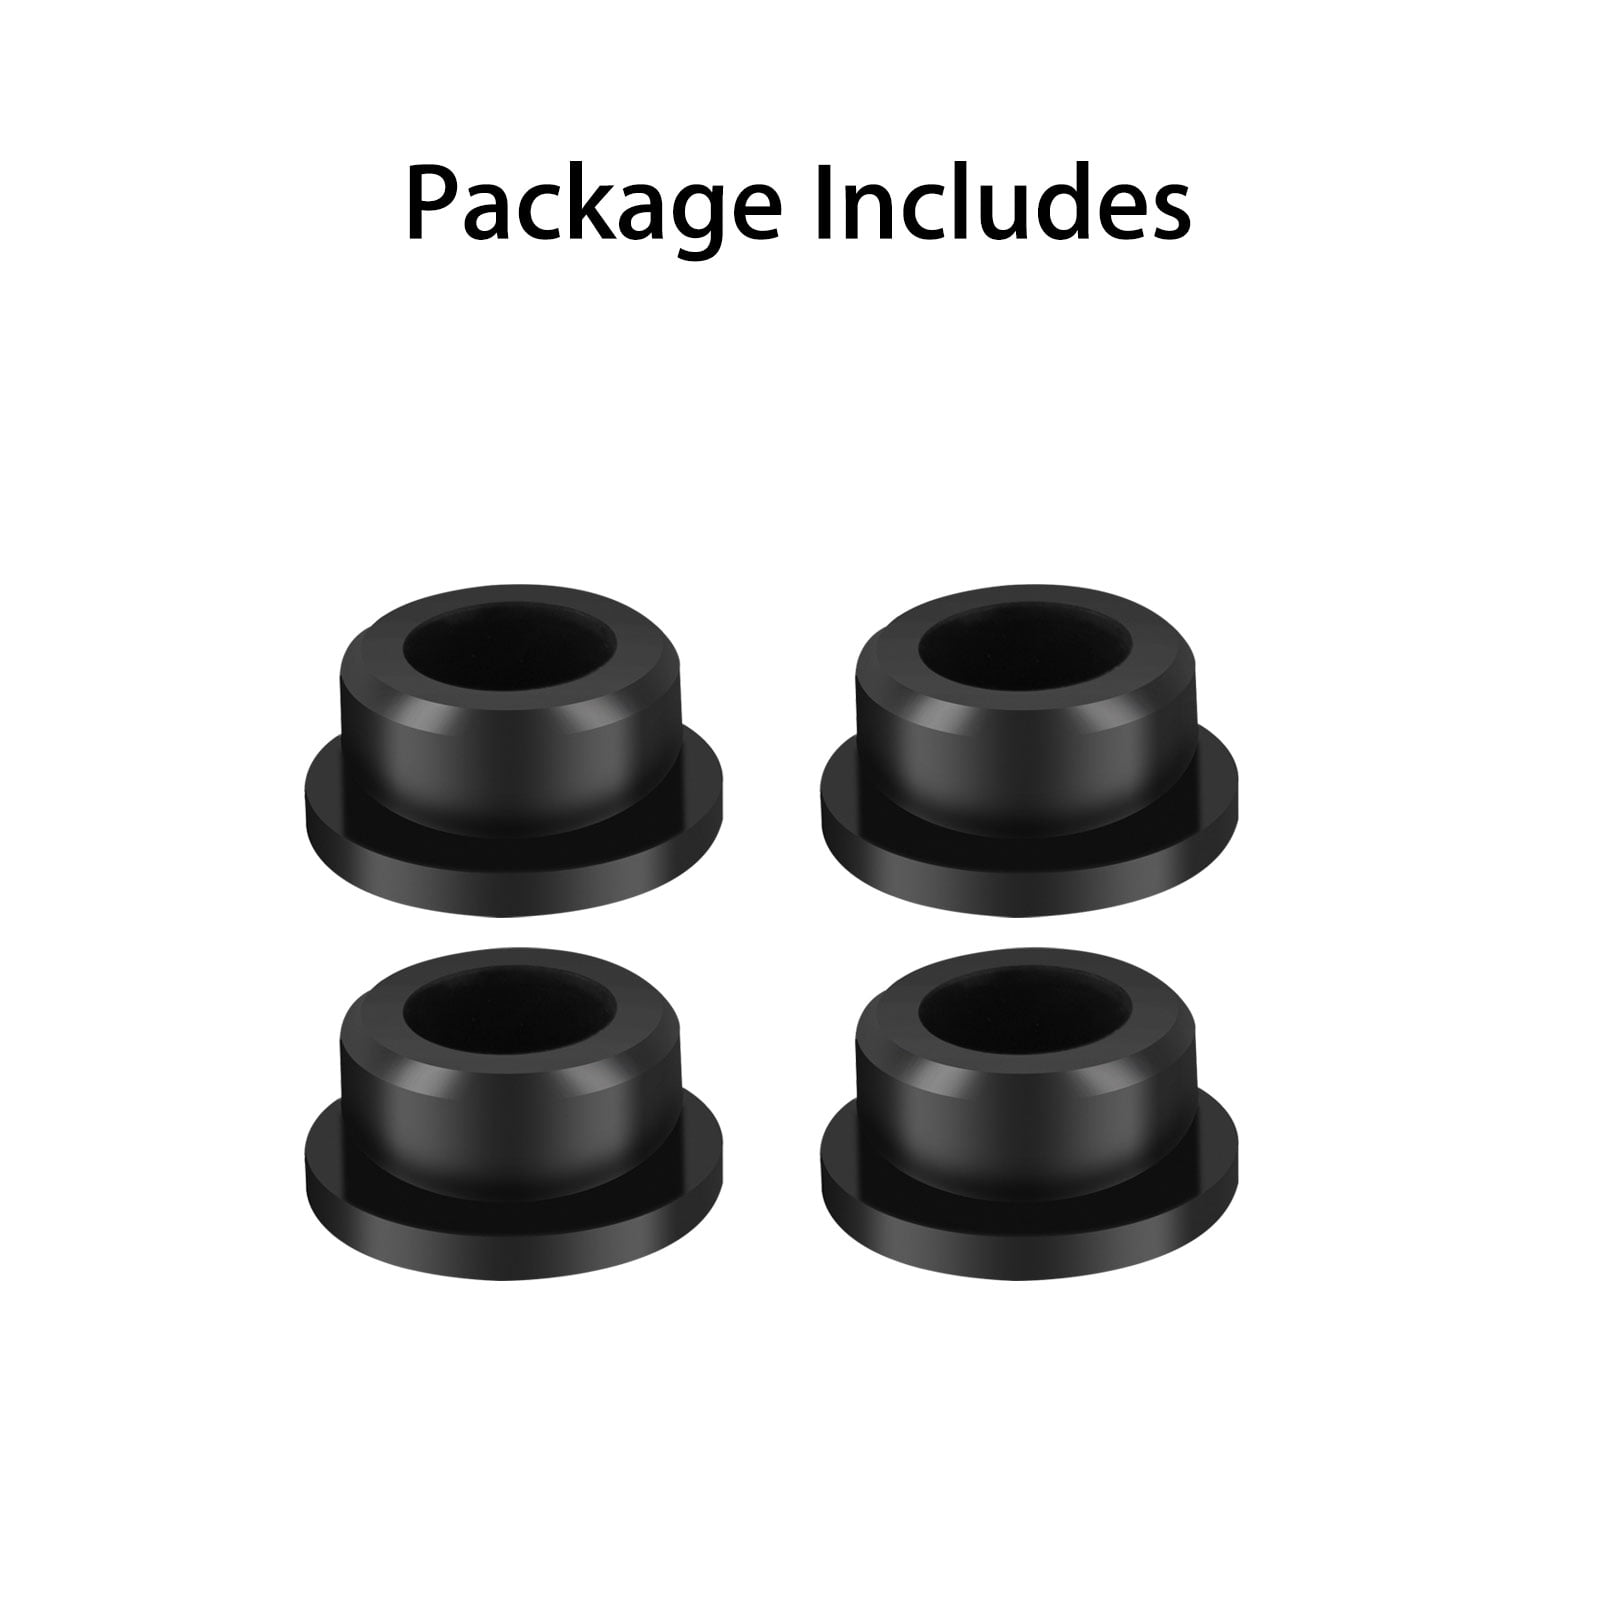 Eames Eiffel Style Chair Glides Black Replacement Feet Pack of 4+1